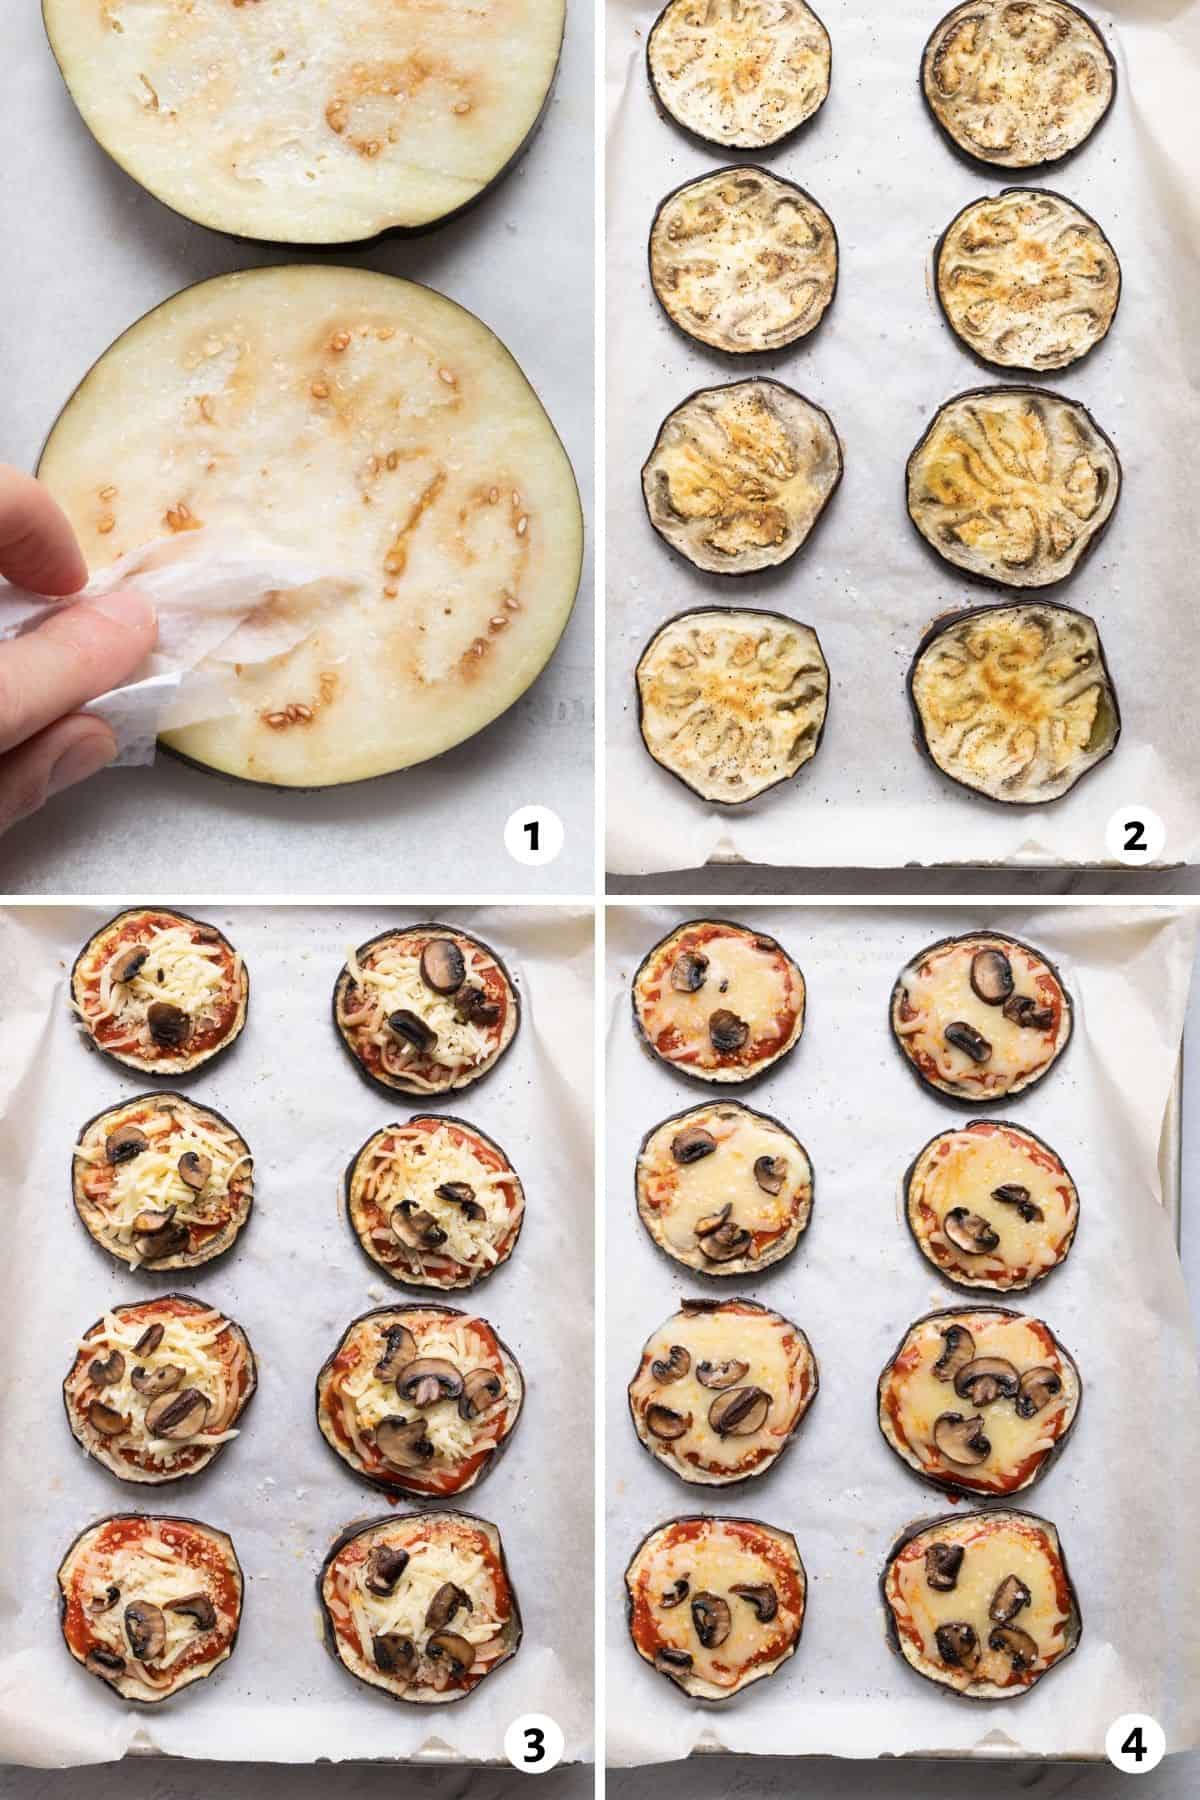 4 image collage to show how to sweat the eggplant, cook it, then add toppings and finish it off